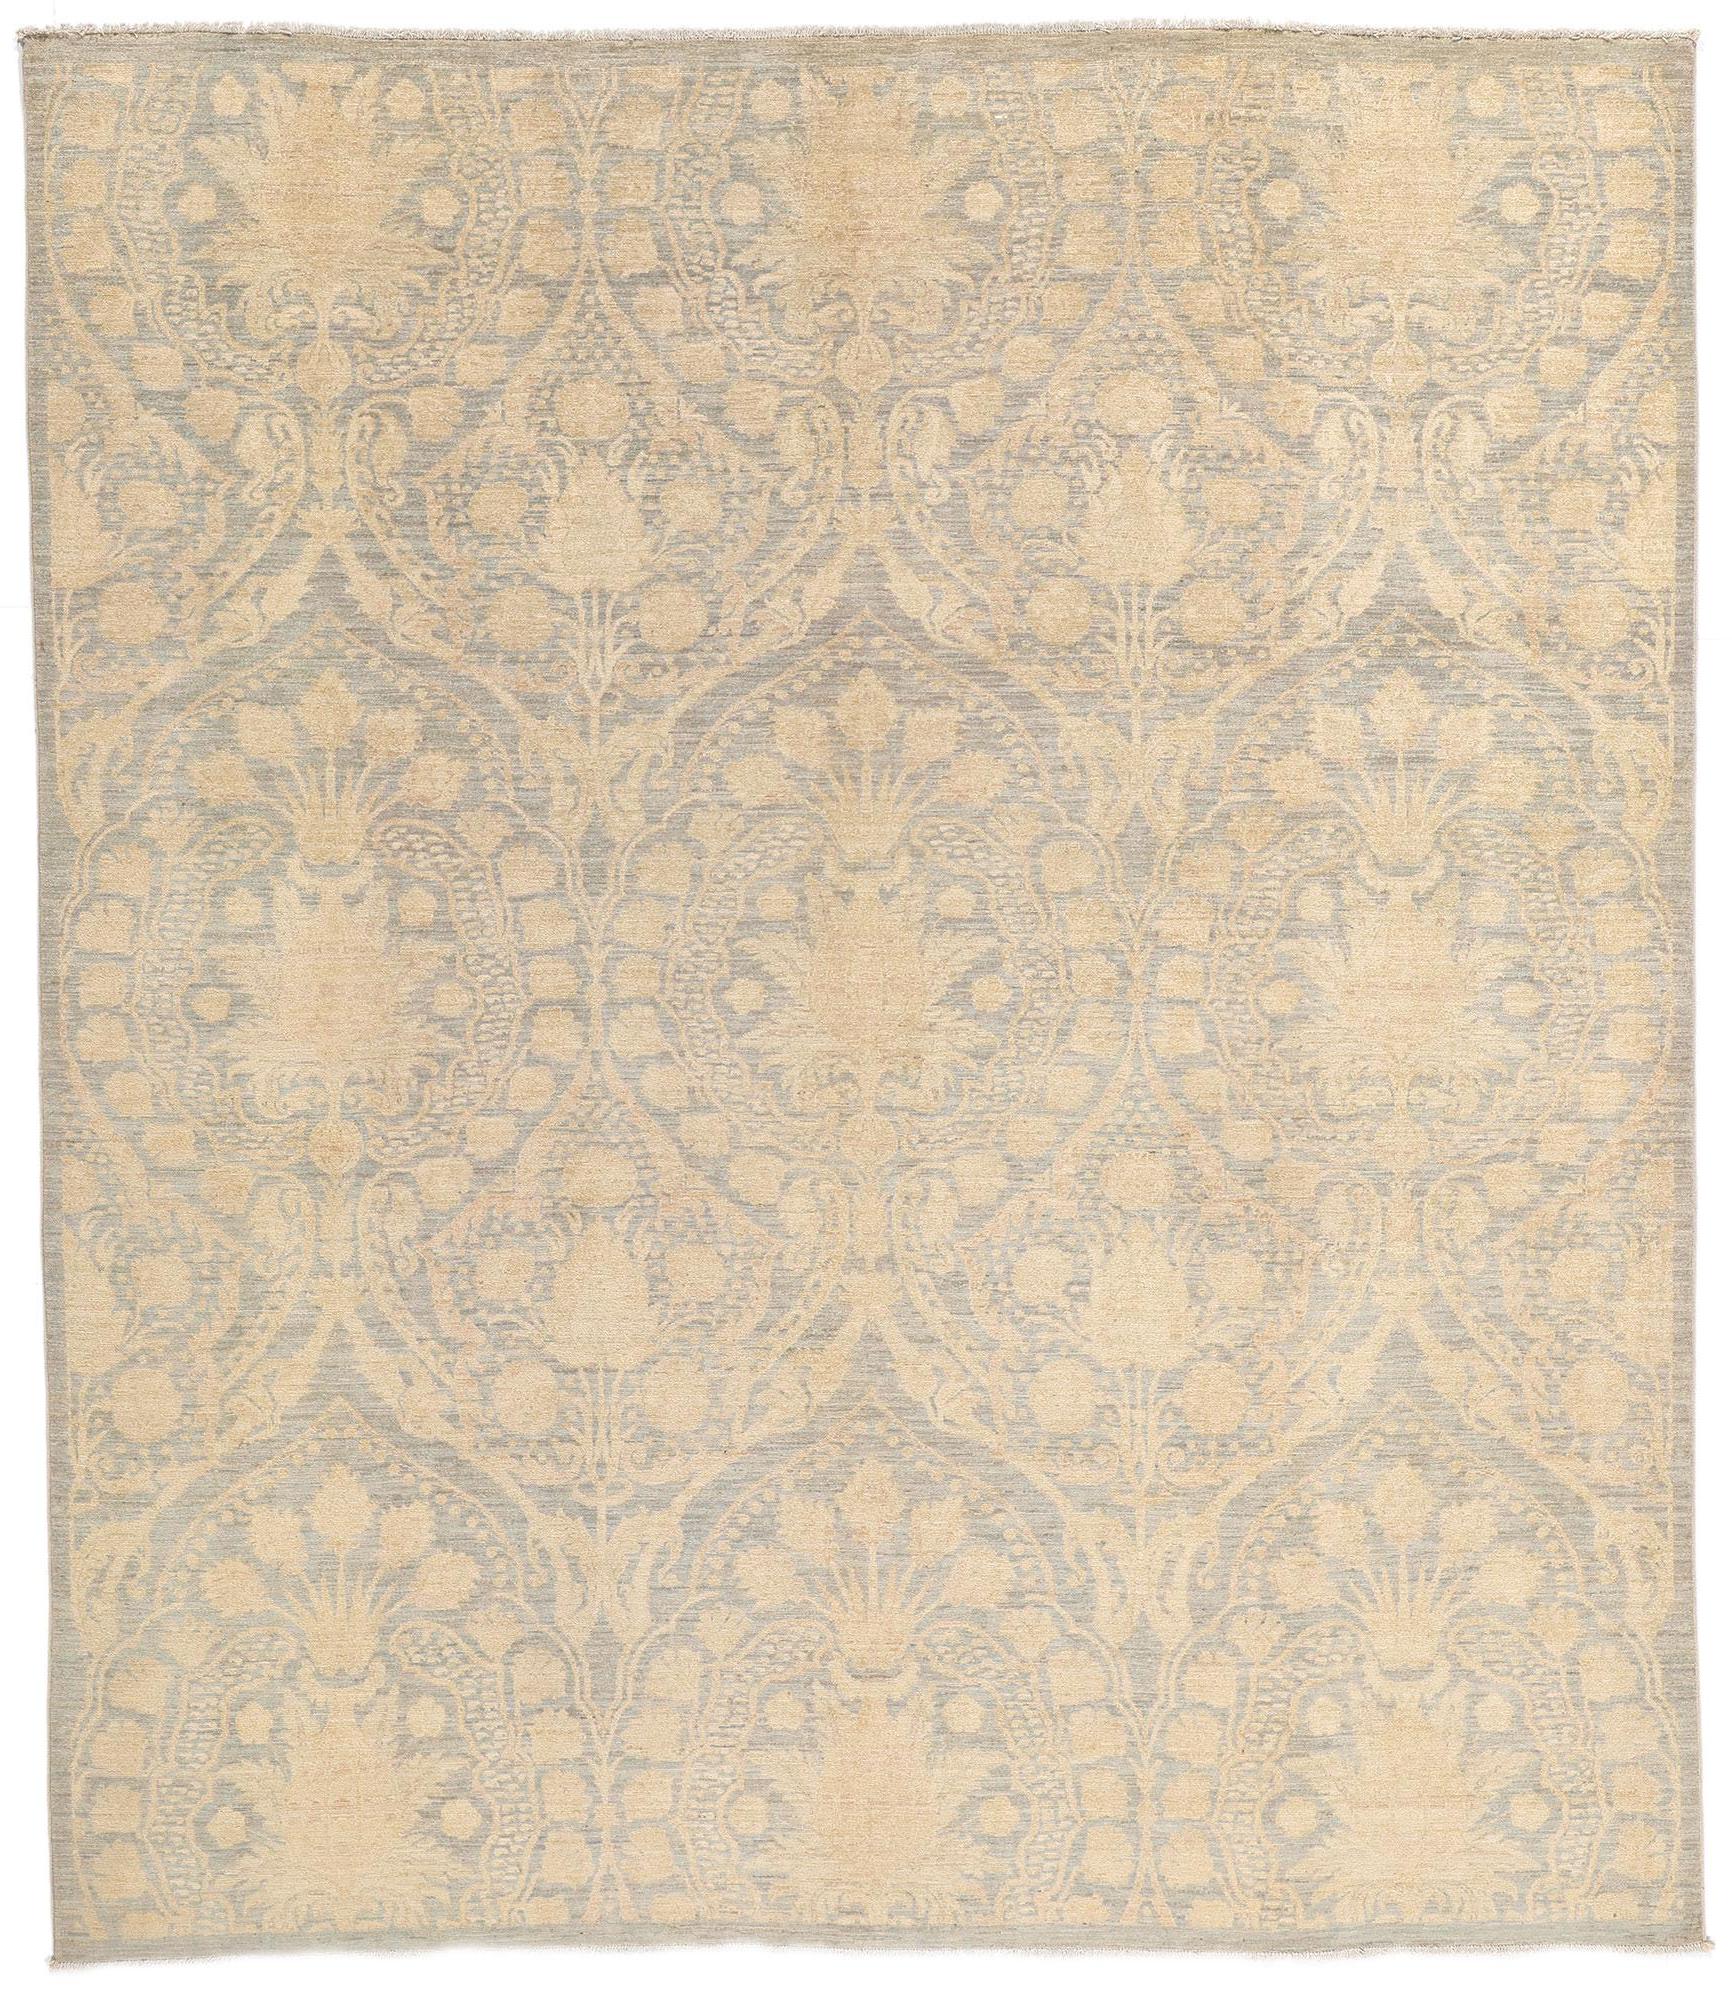 Contemporary Ikat Damask Rug For Sale